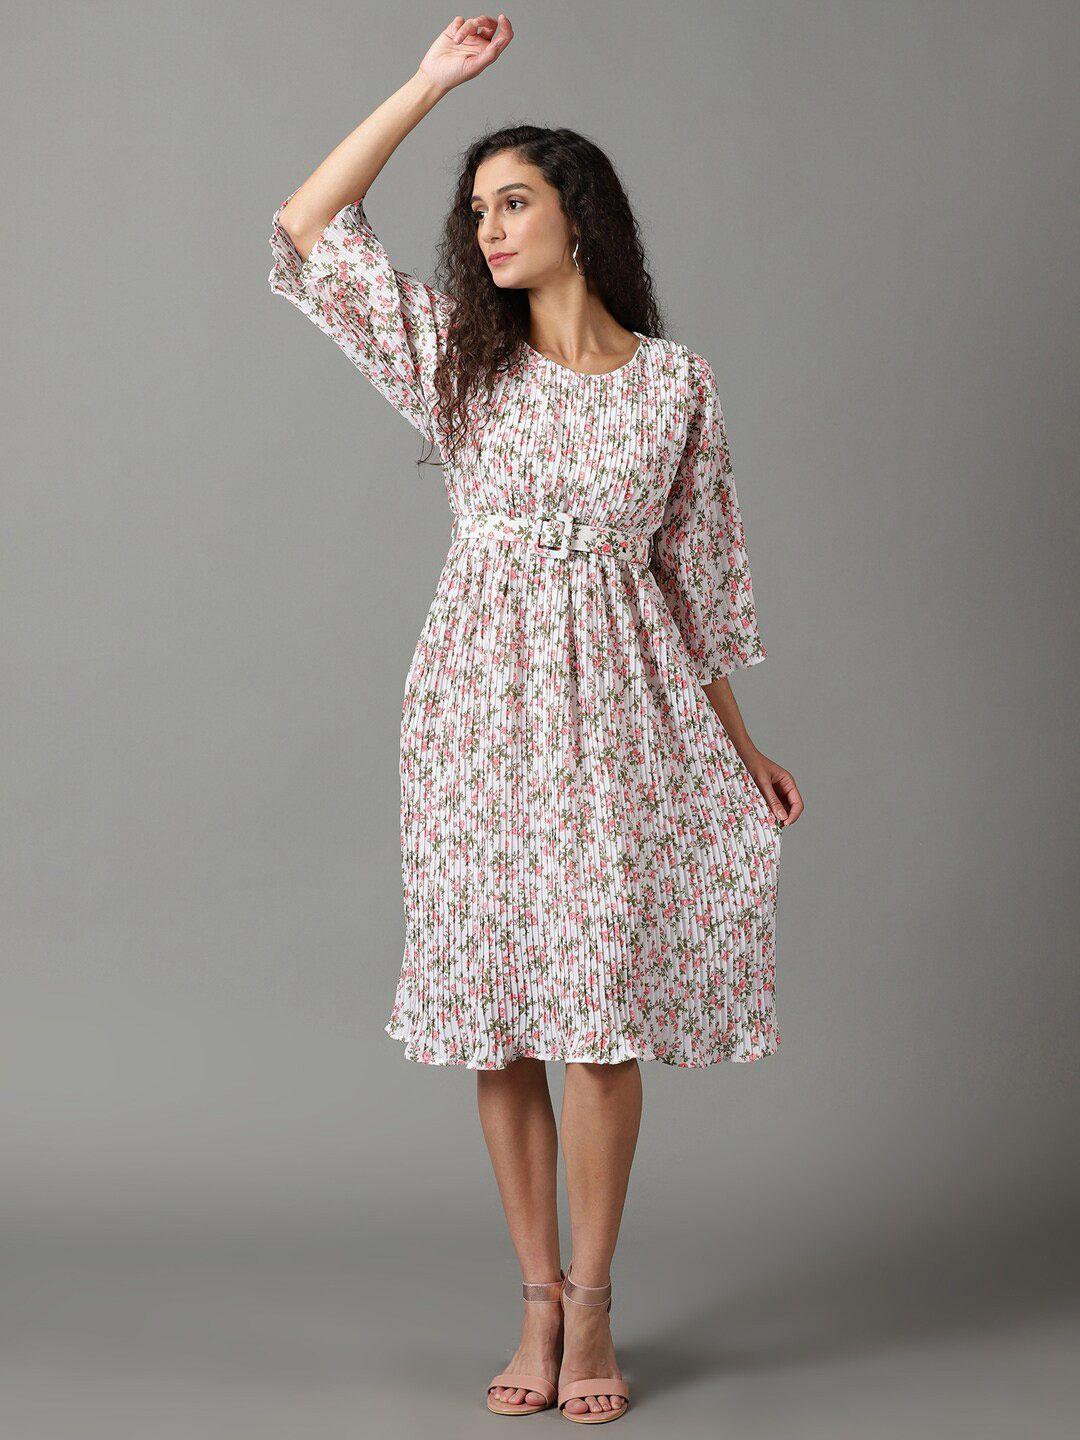 showoff-round-neck-accordion-pleats-floral-printed-chiffon-a-line-dress-with-belt